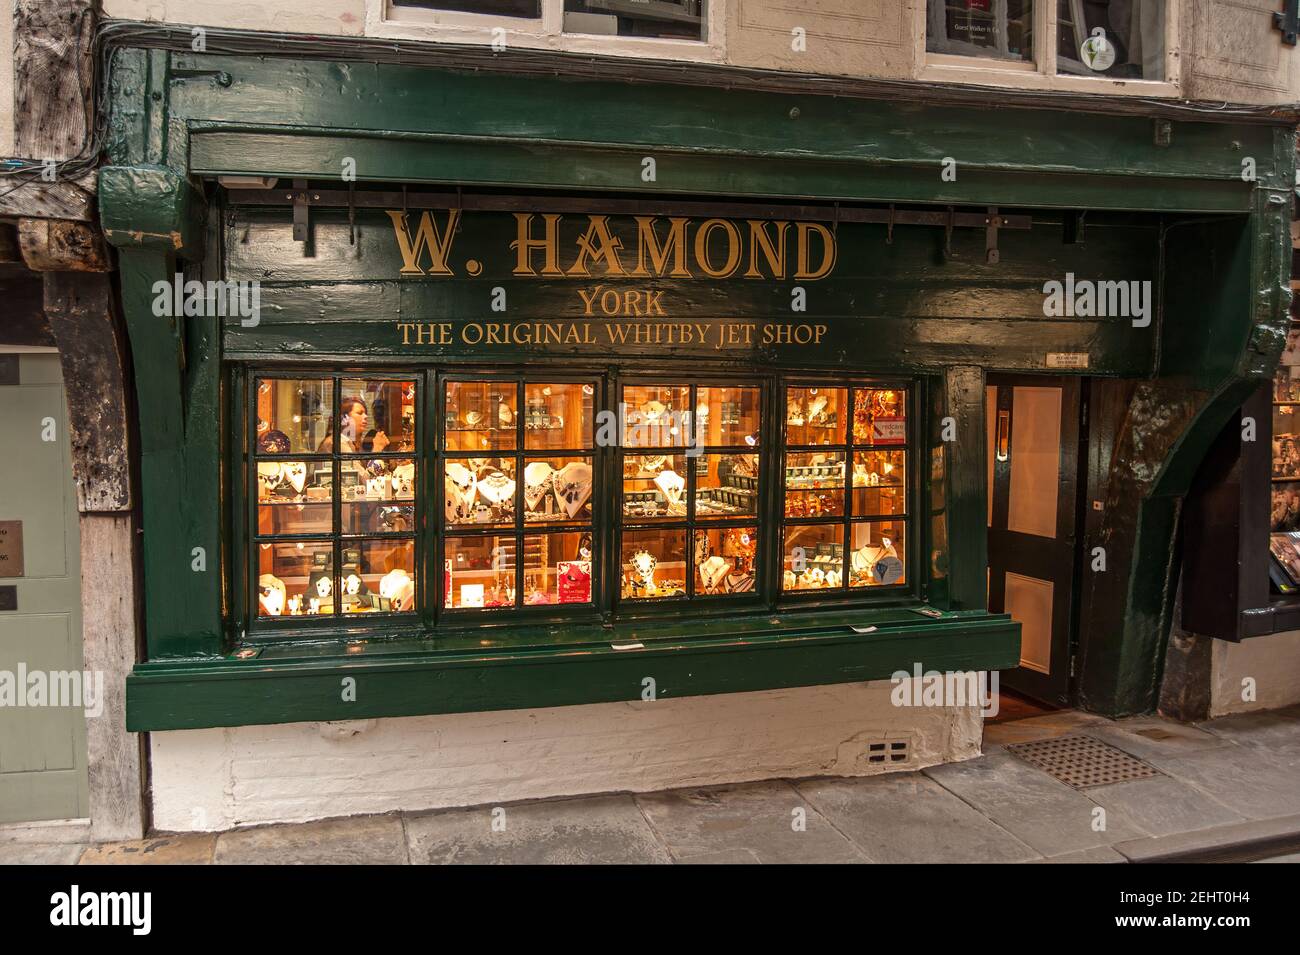 YORK, YORKSHIRE, UK - MARCH 13, 2010:  W Hammond Shop in The Shambles selling Whitby Jet Stock Photo